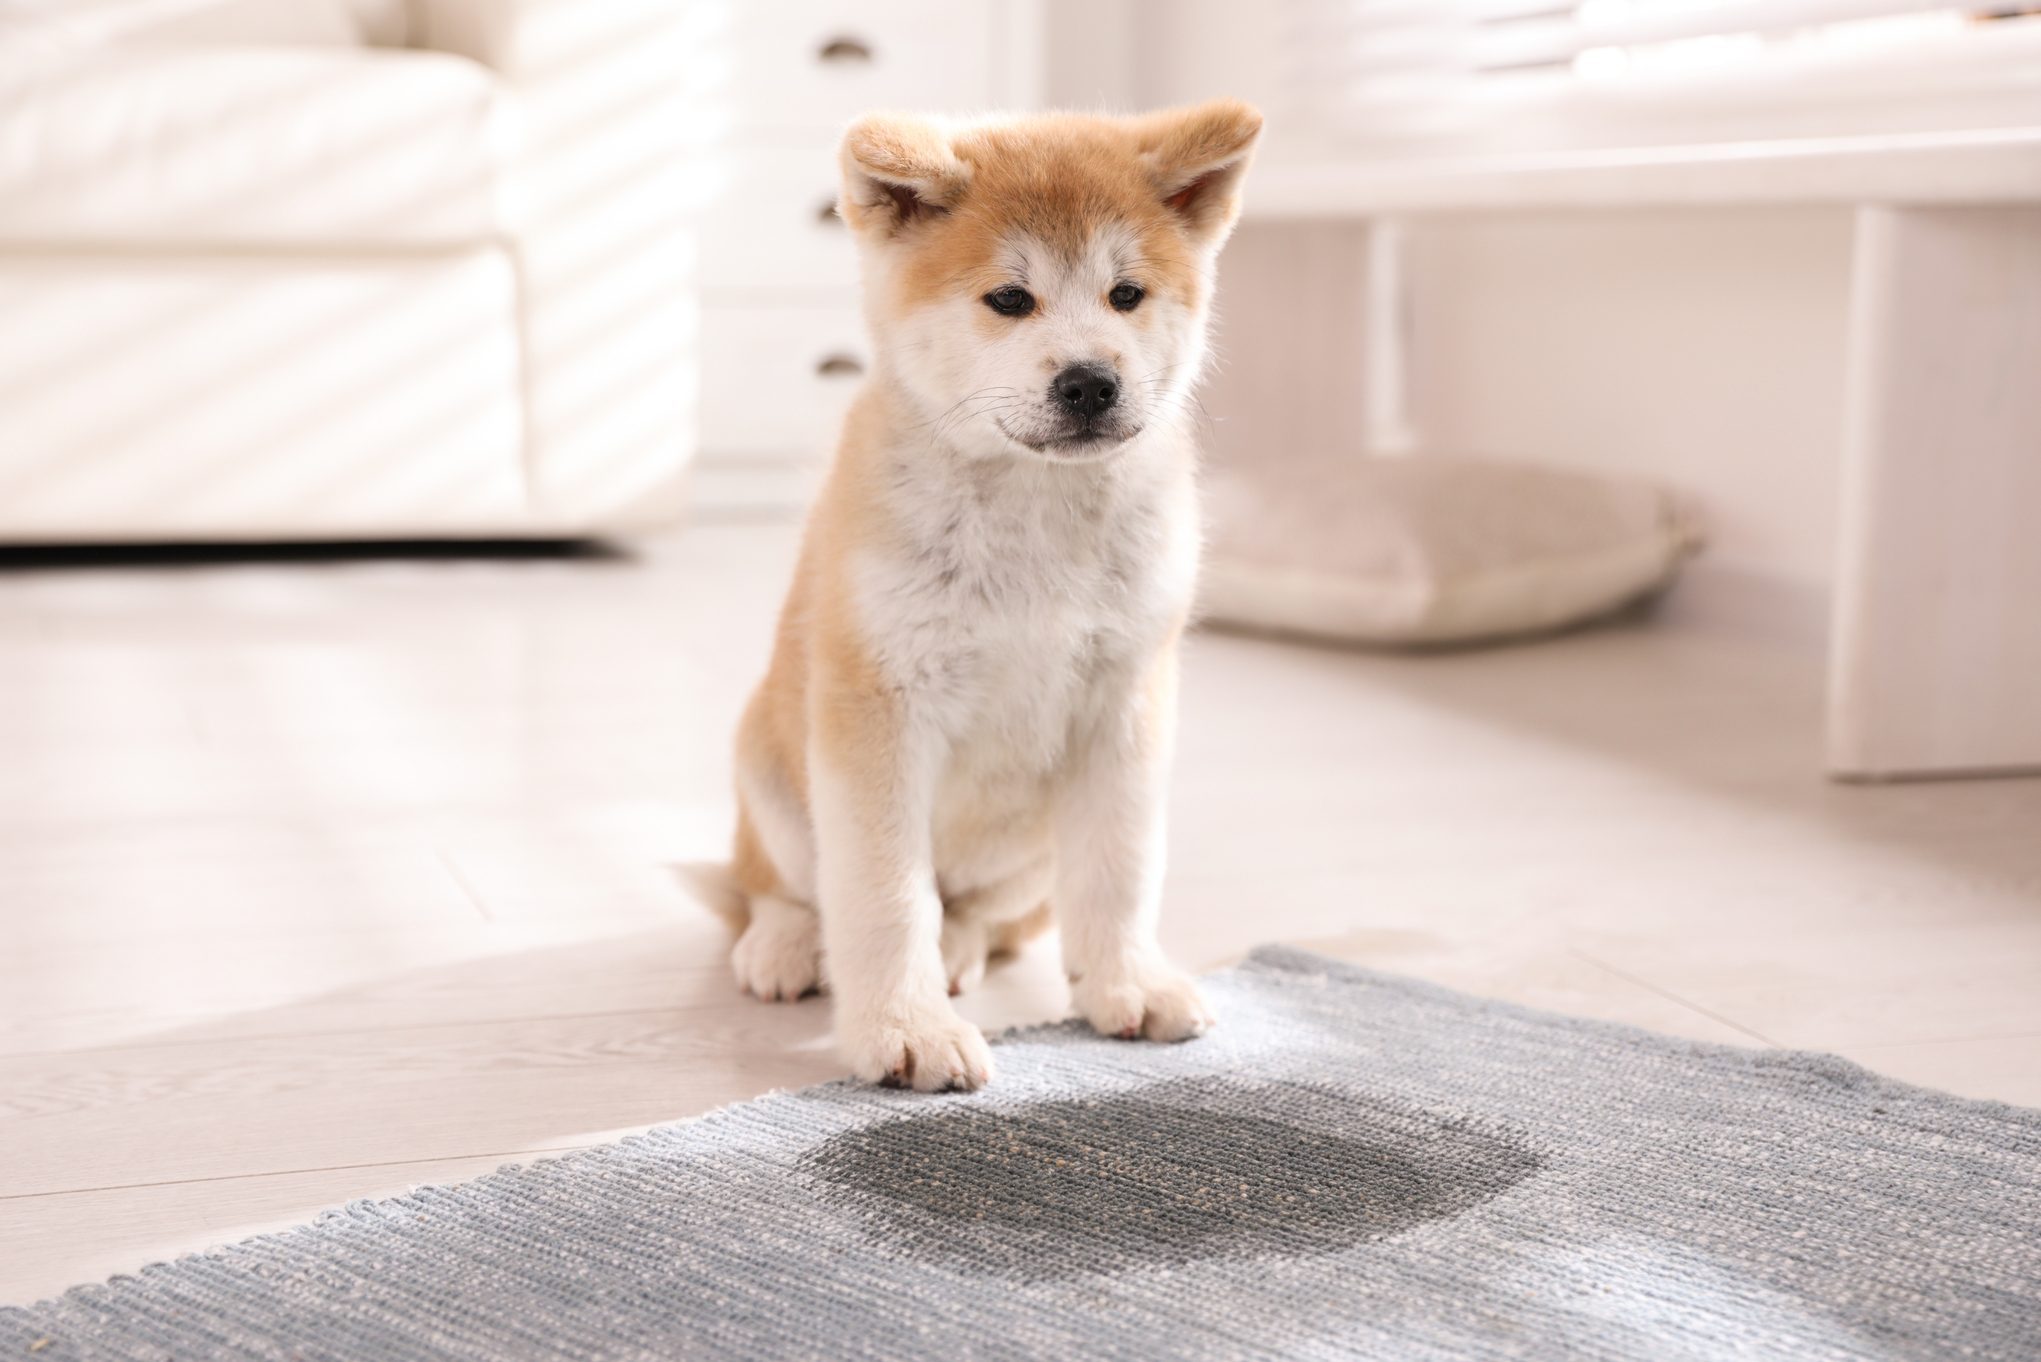 how to clean up dog pee and poop on carpet